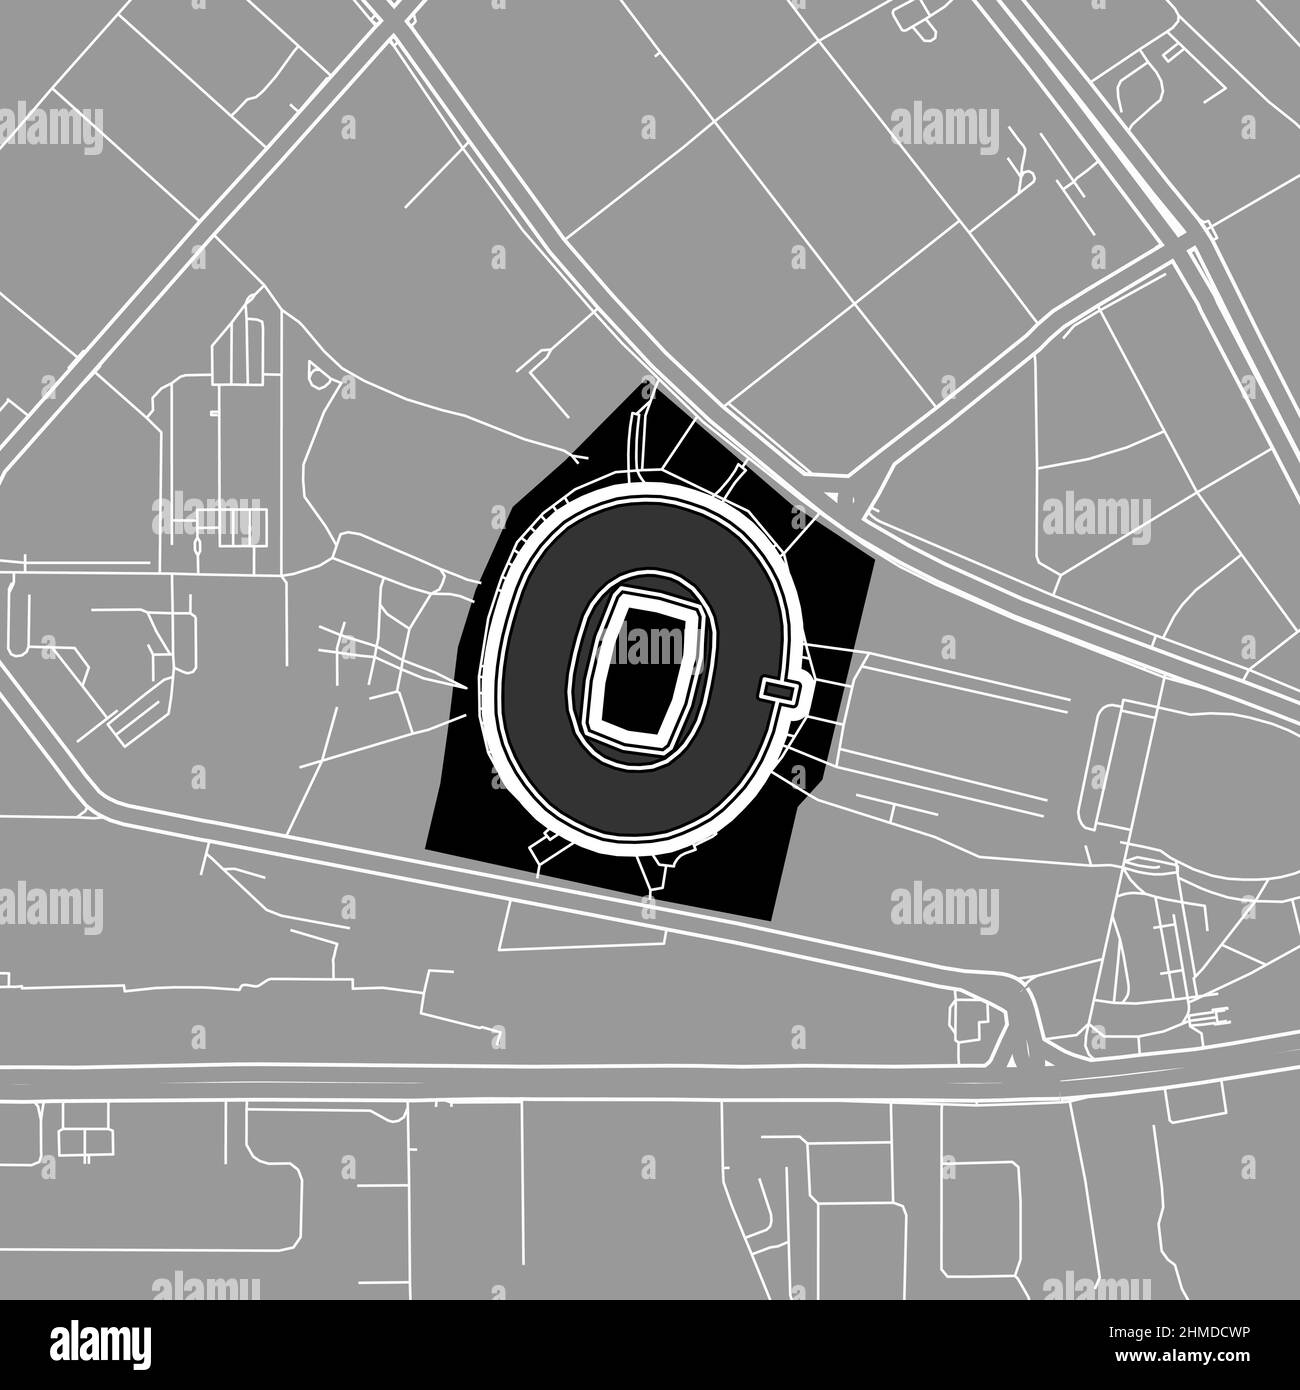 Budapest, Baseball MLB Stadium, outline vector map. The baseball statium map was drawn with white areas and lines for main roads, side roads. Stock Vector